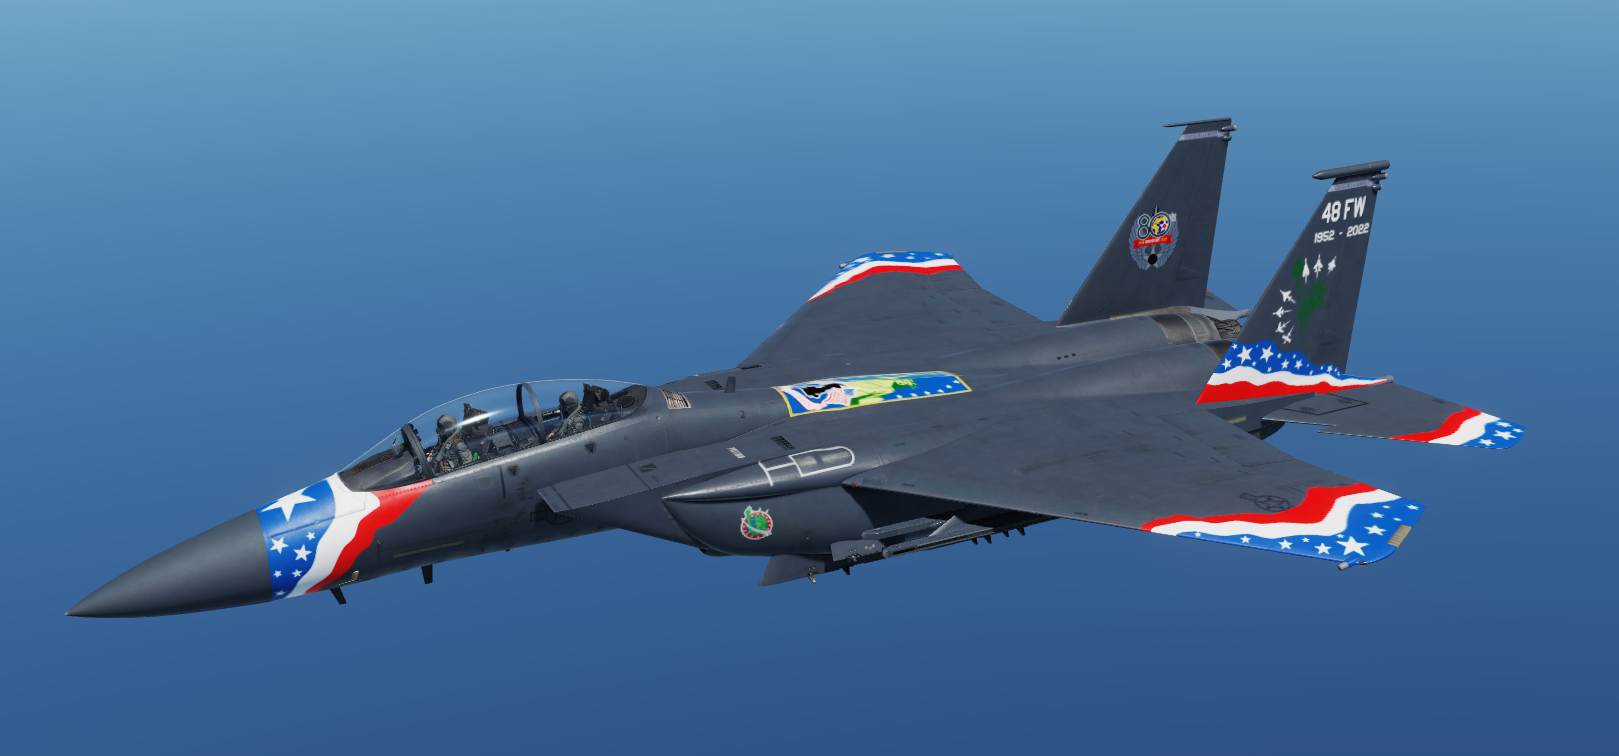 U.S. Air Force 48th Fighter Wing new heritage F-15E Strike Eagle